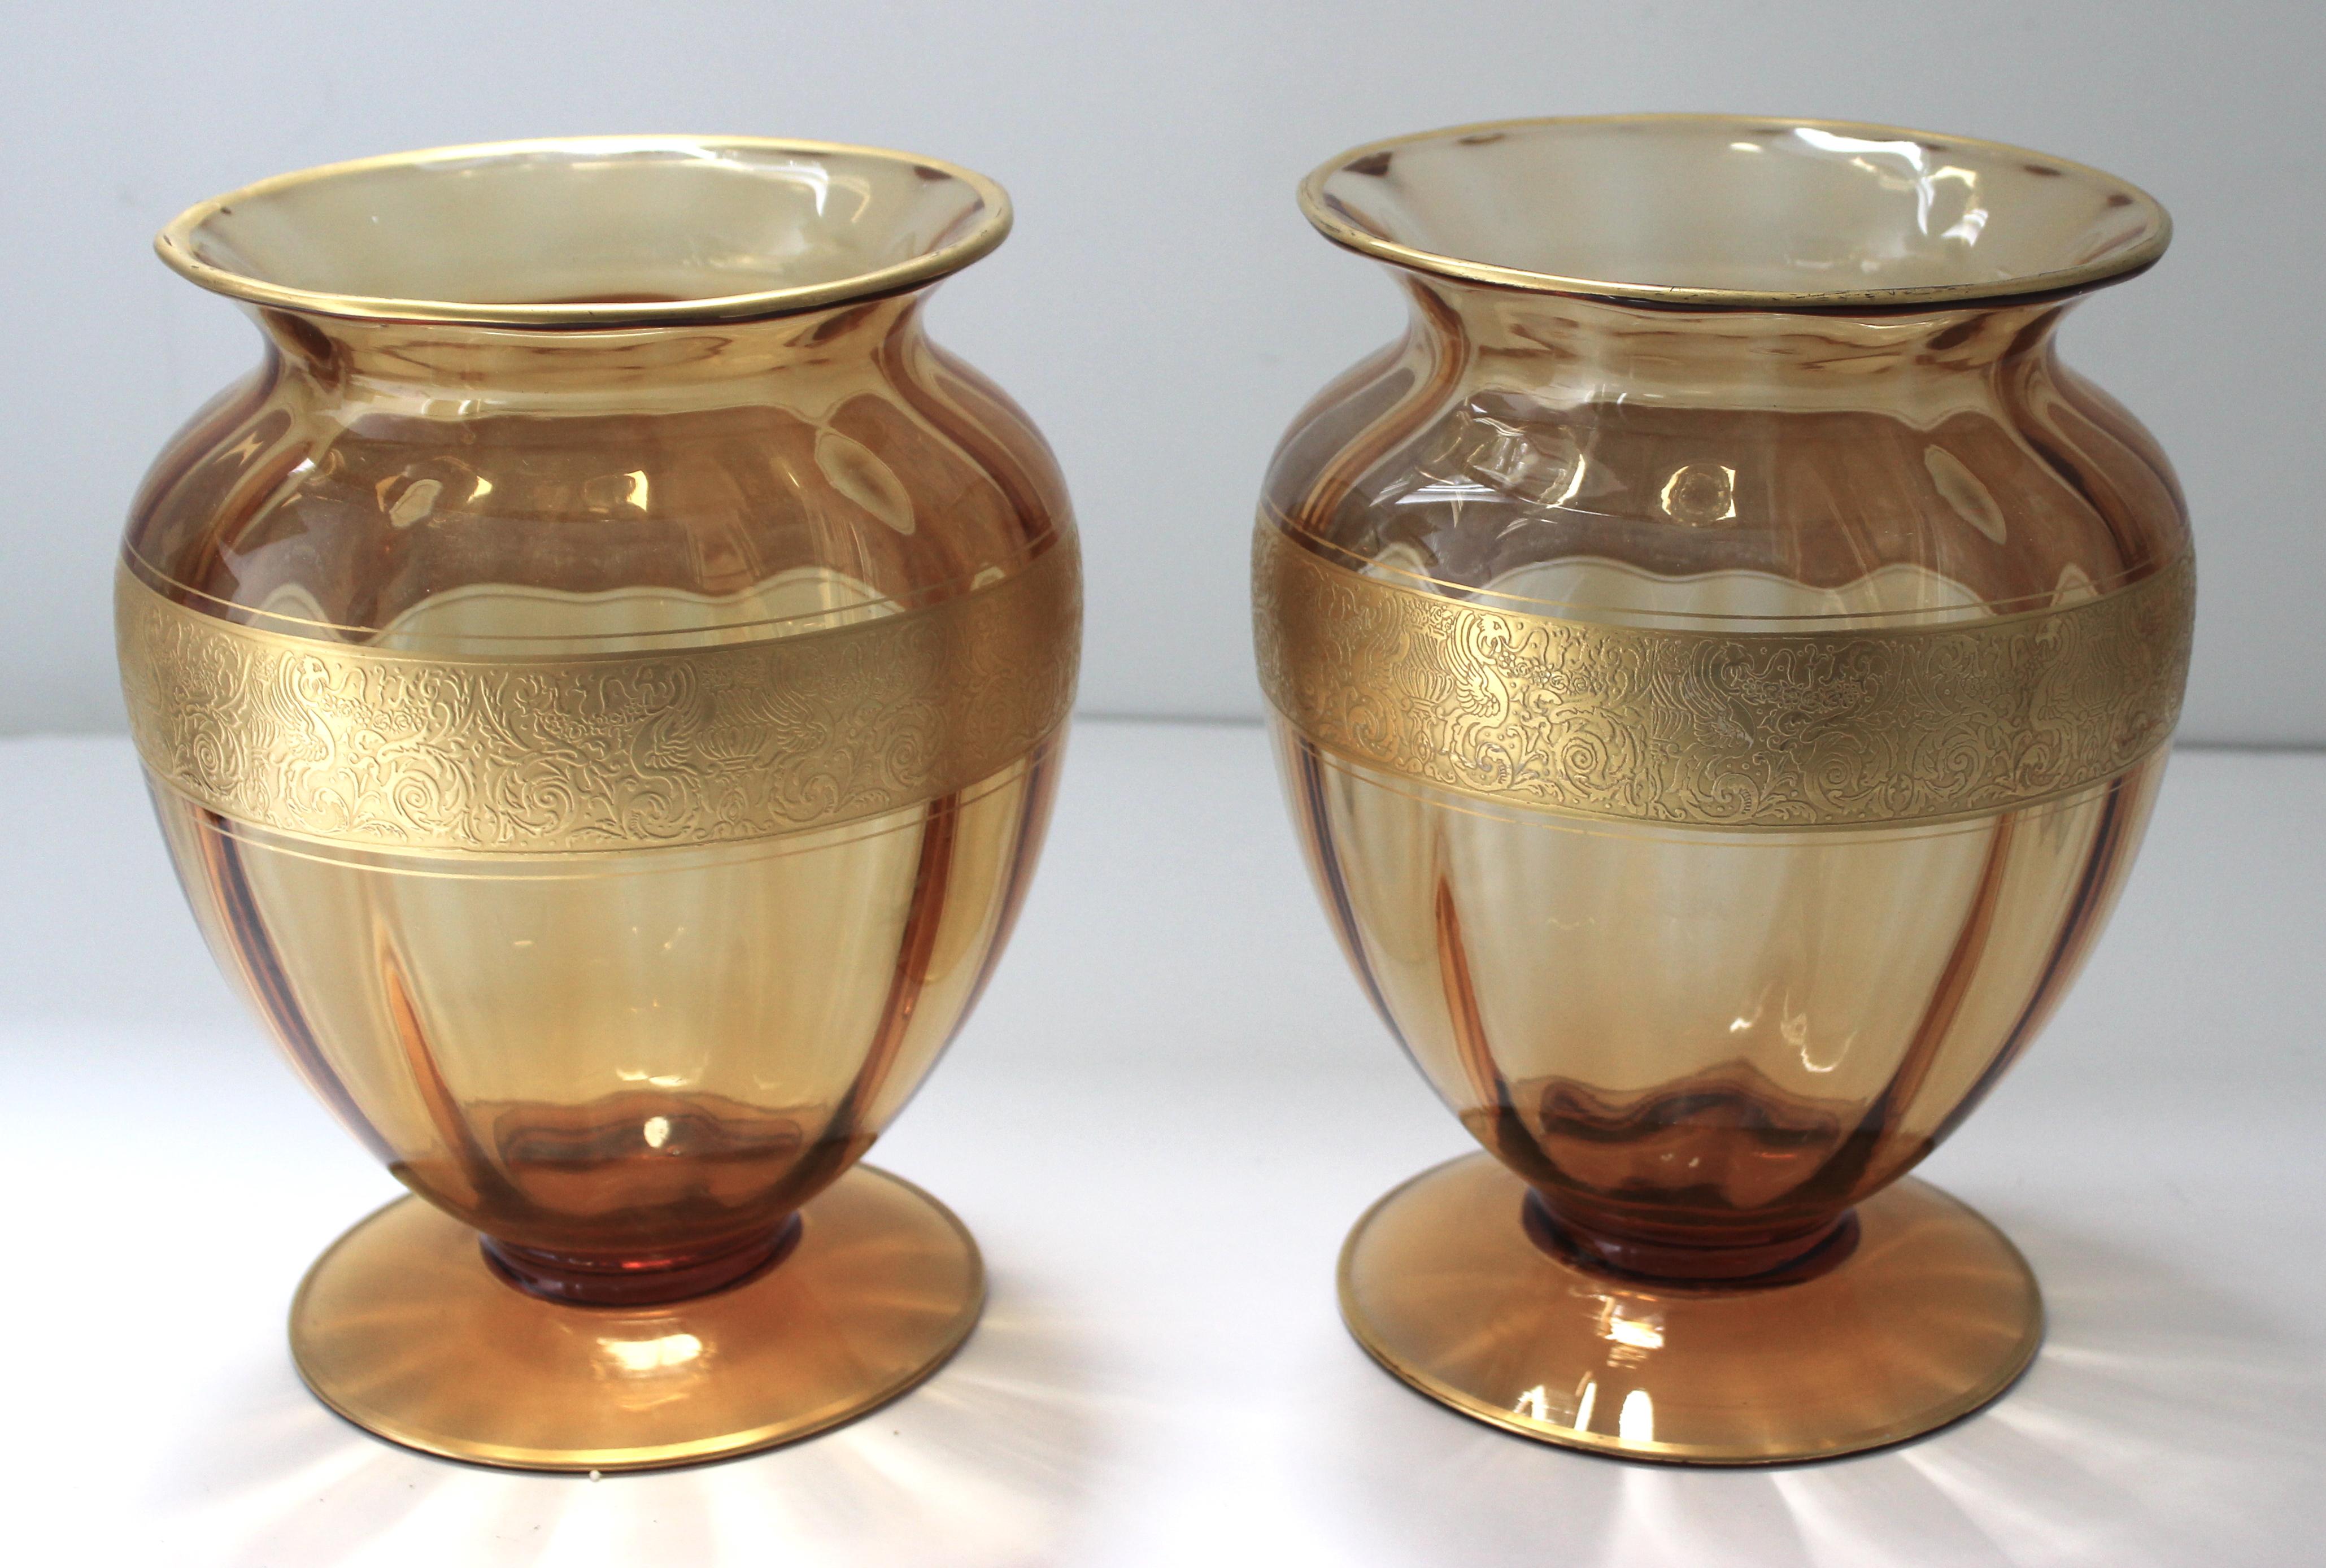 This large scale and stylish pair of Moser Glassorks vases date to the late 1930s-1940s and were acquired from a Palm Beach estate. The golden coloration catches the light beautifully as does the gilt gold band and edges. The band is detailed with